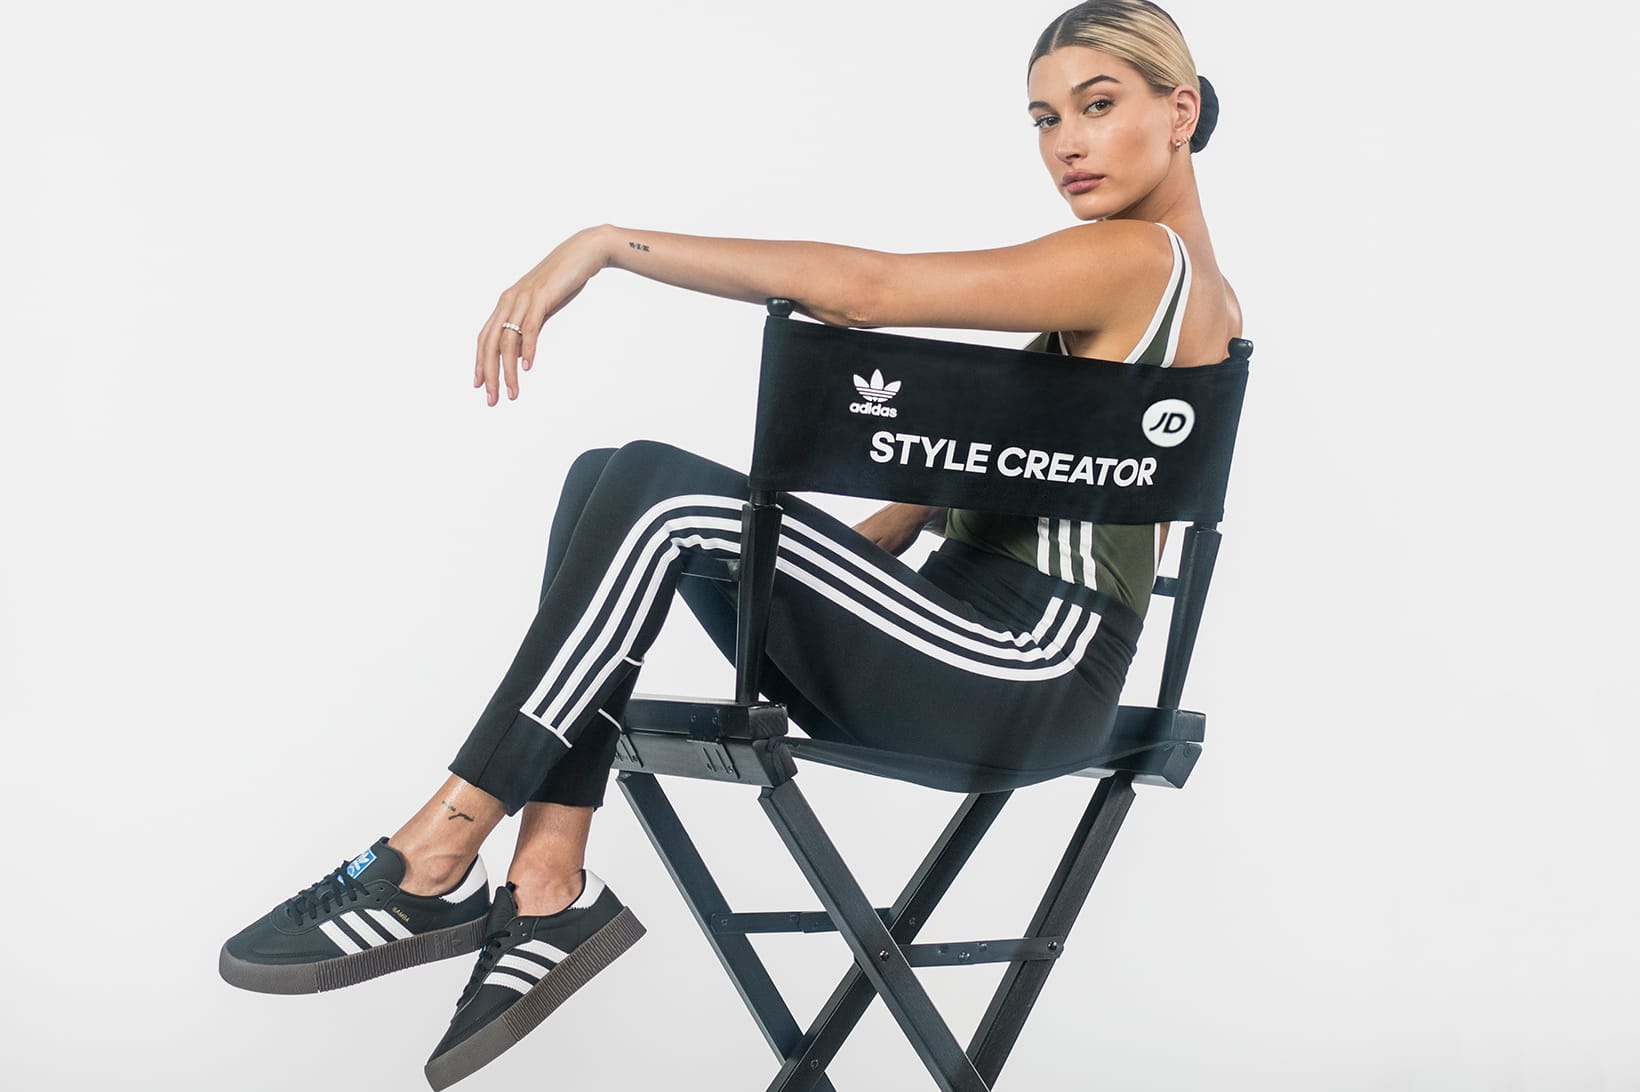 adidas sport and style